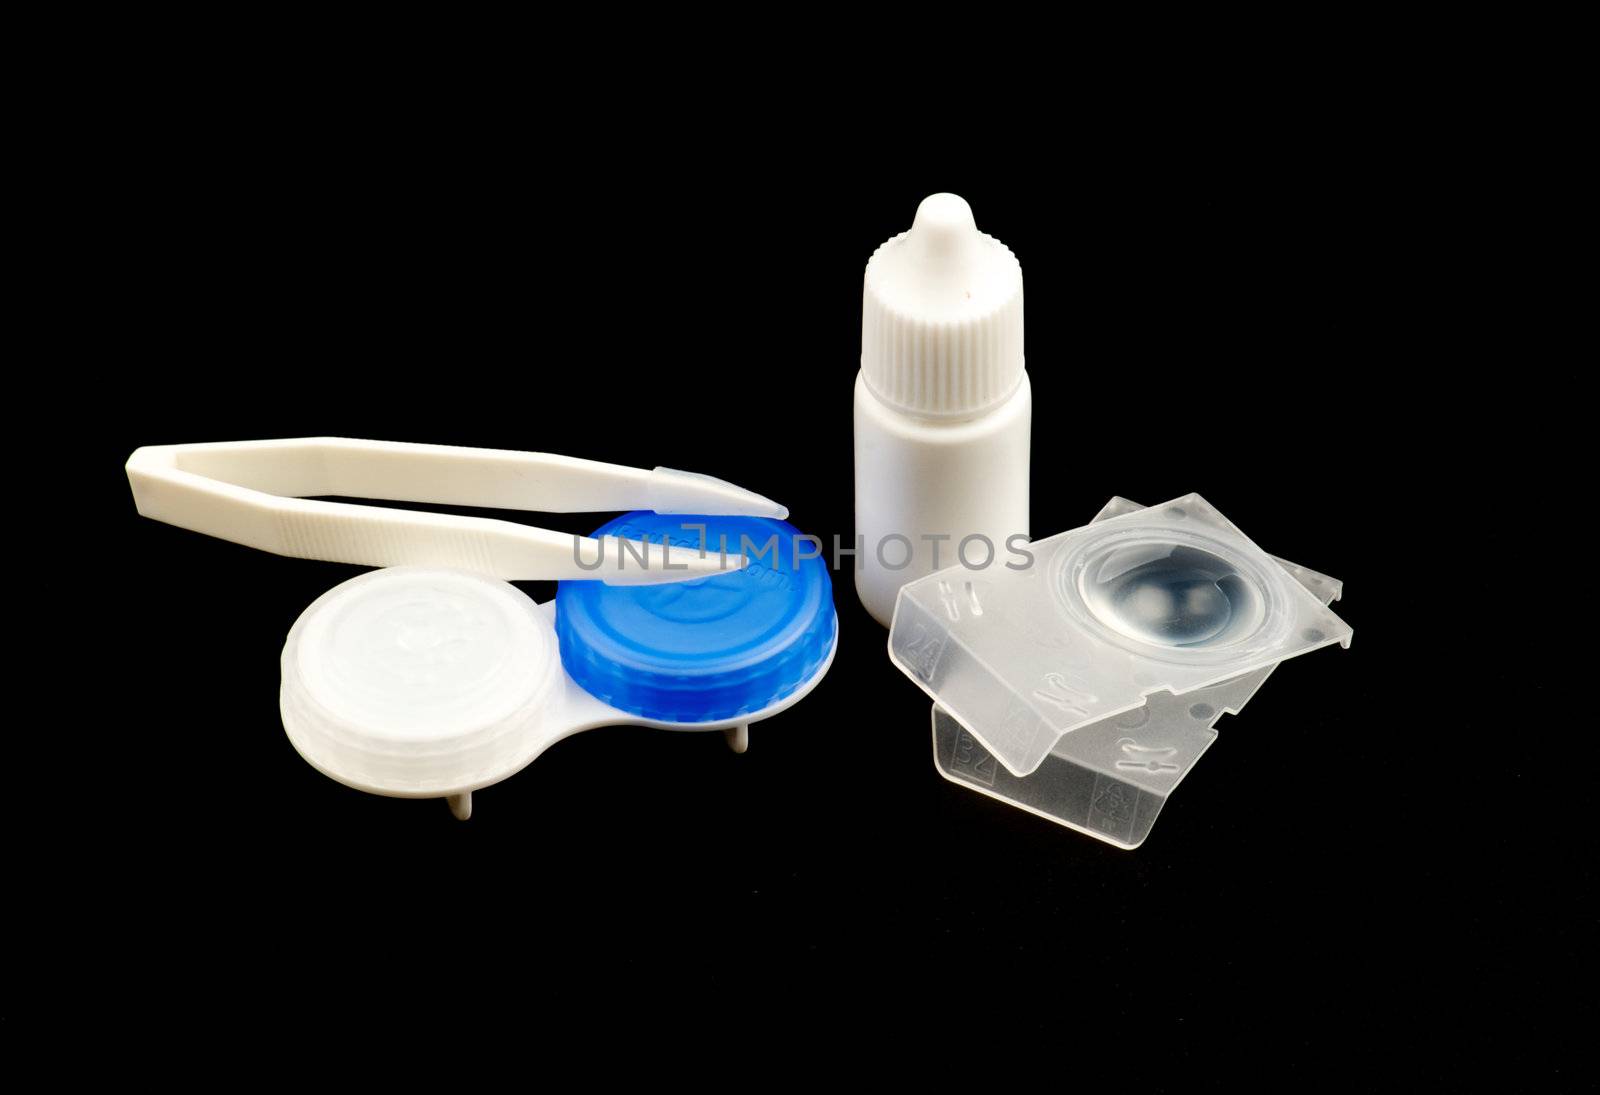 Contact lens case and accessories isolated on black background